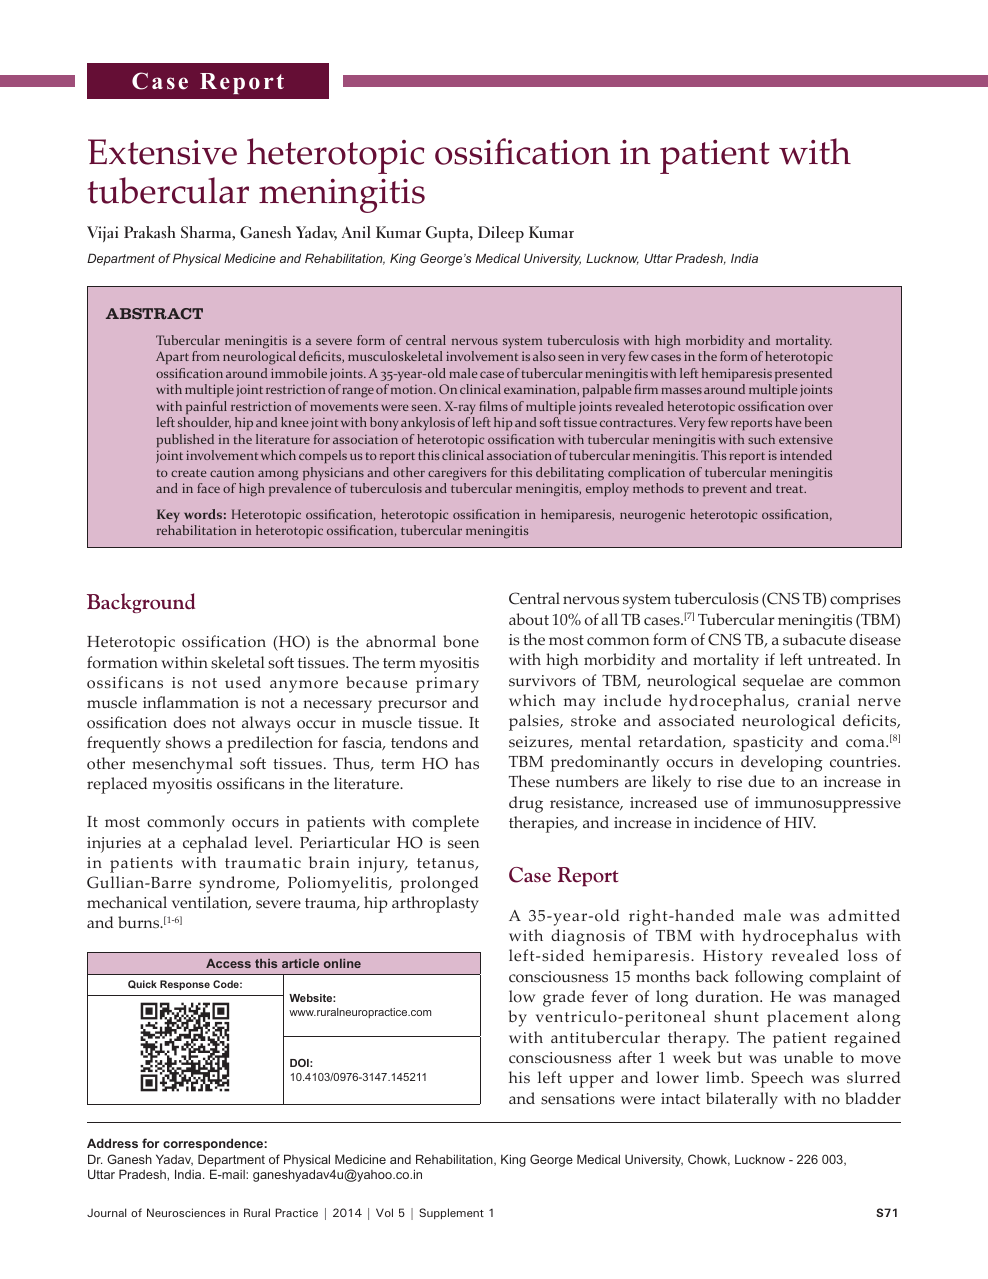 Extensive Heterotopic Ossification In Patient With Tubercular Meningitis Topic Of Research Paper In Clinical Medicine Download Scholarly Article Pdf And Read For Free On Cyberleninka Open Science Hub